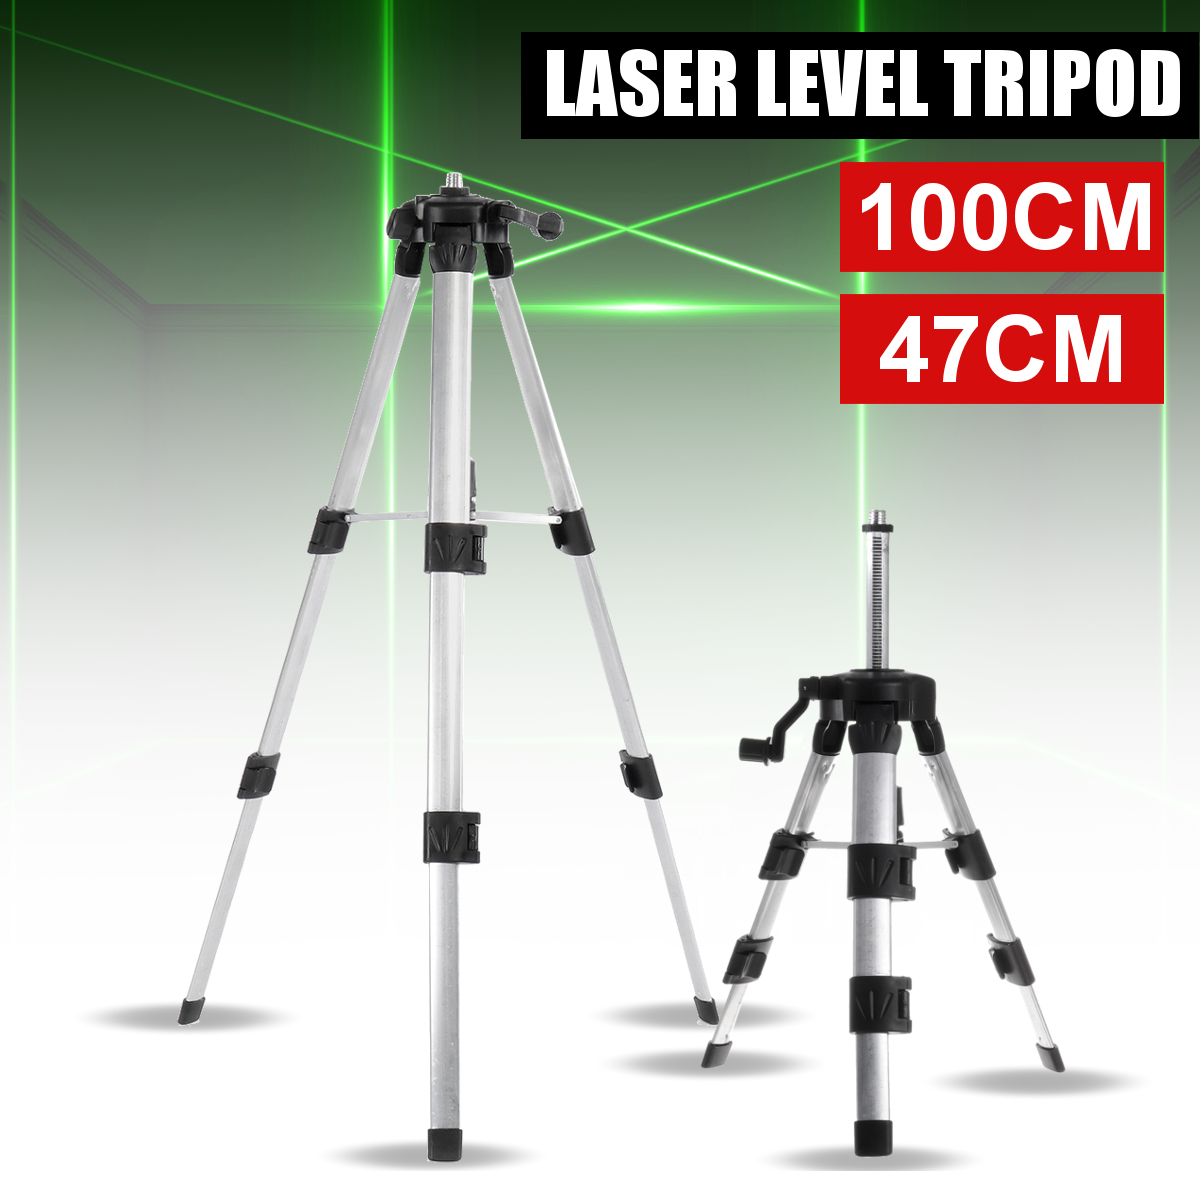 47100CM-Universal-Aluminum-Alloy-Tripod-Adjustable-Stand-for-Laser-Level-with-Bag-1937846-1